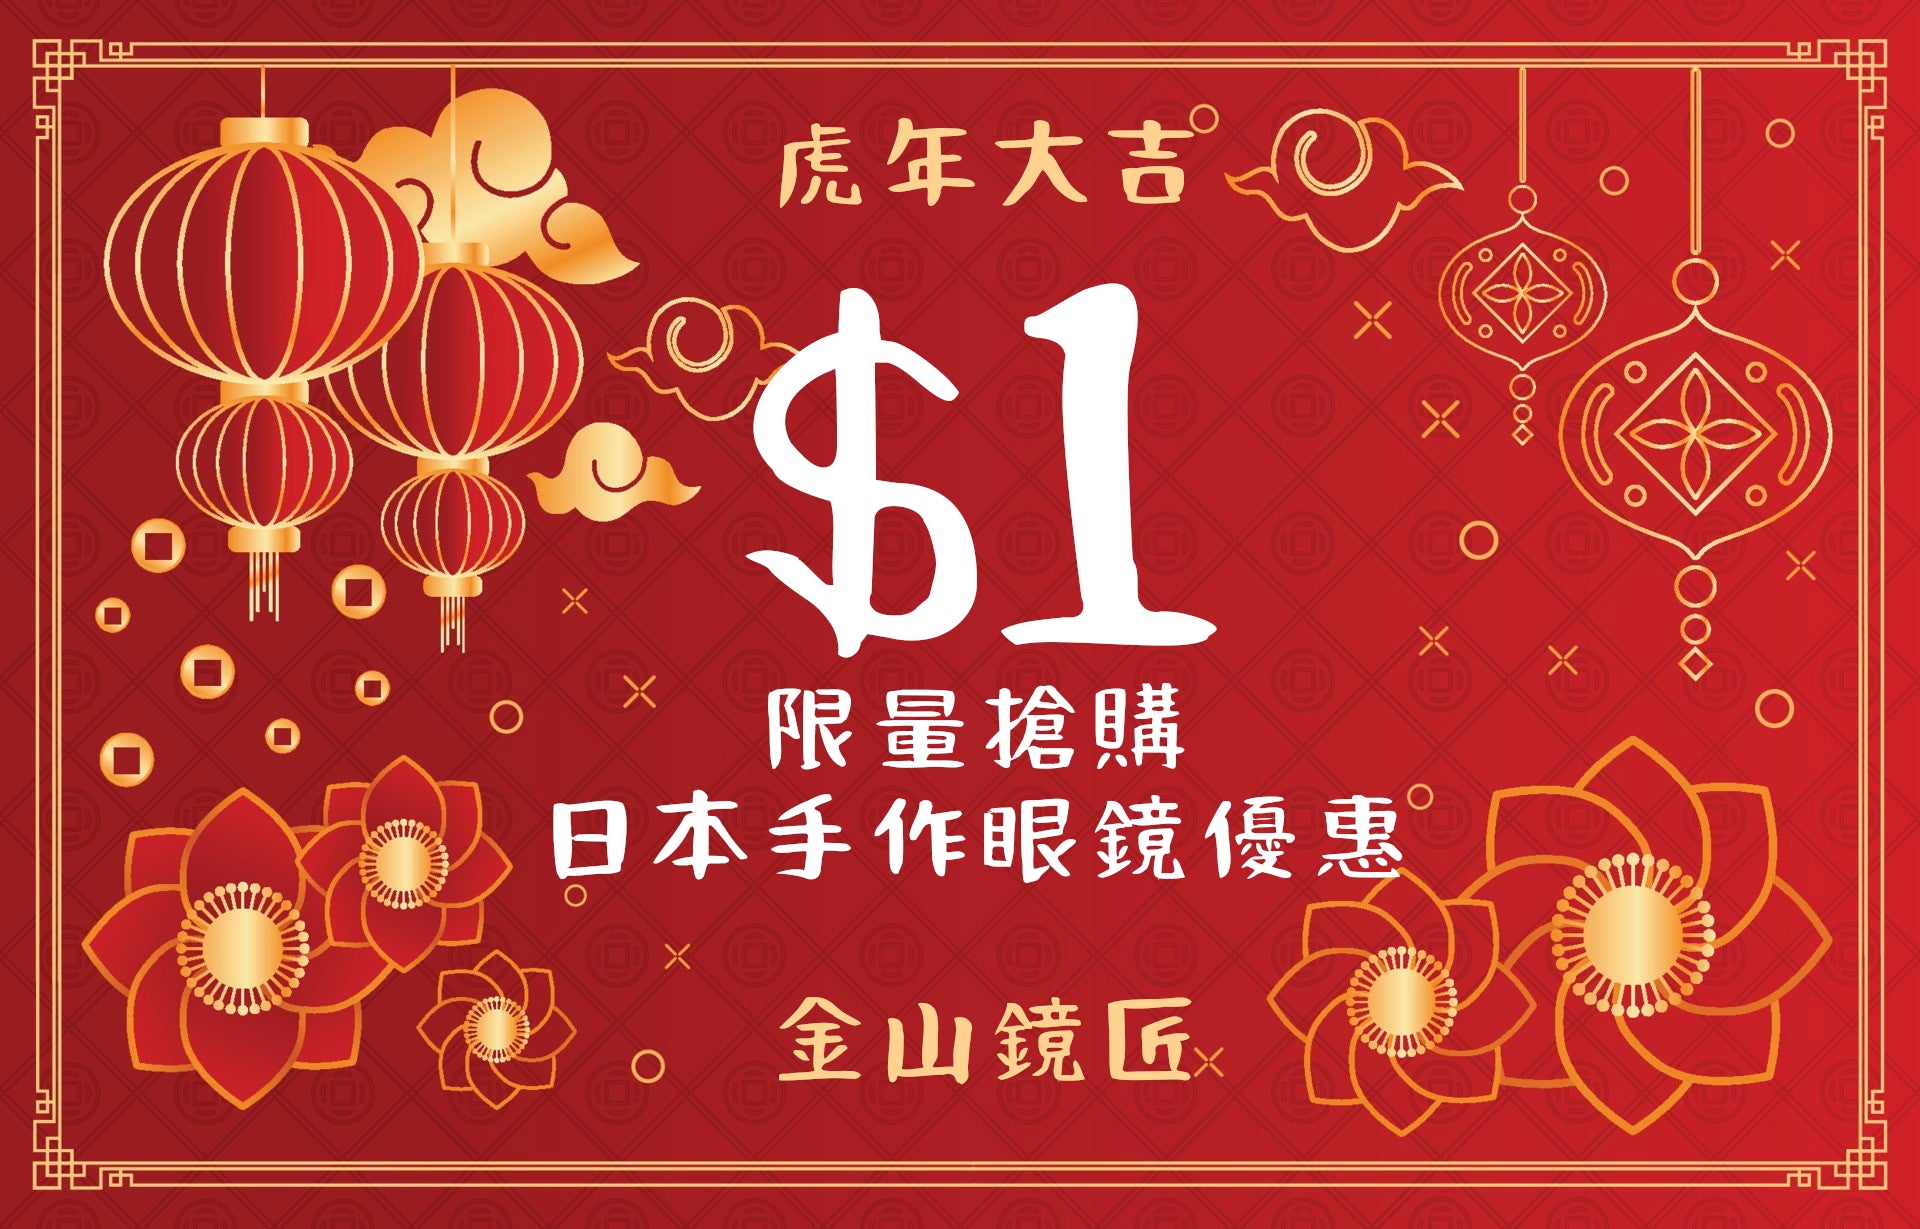 Chinese New Year Offer! $1 Grab a $1,500 Gift Card!